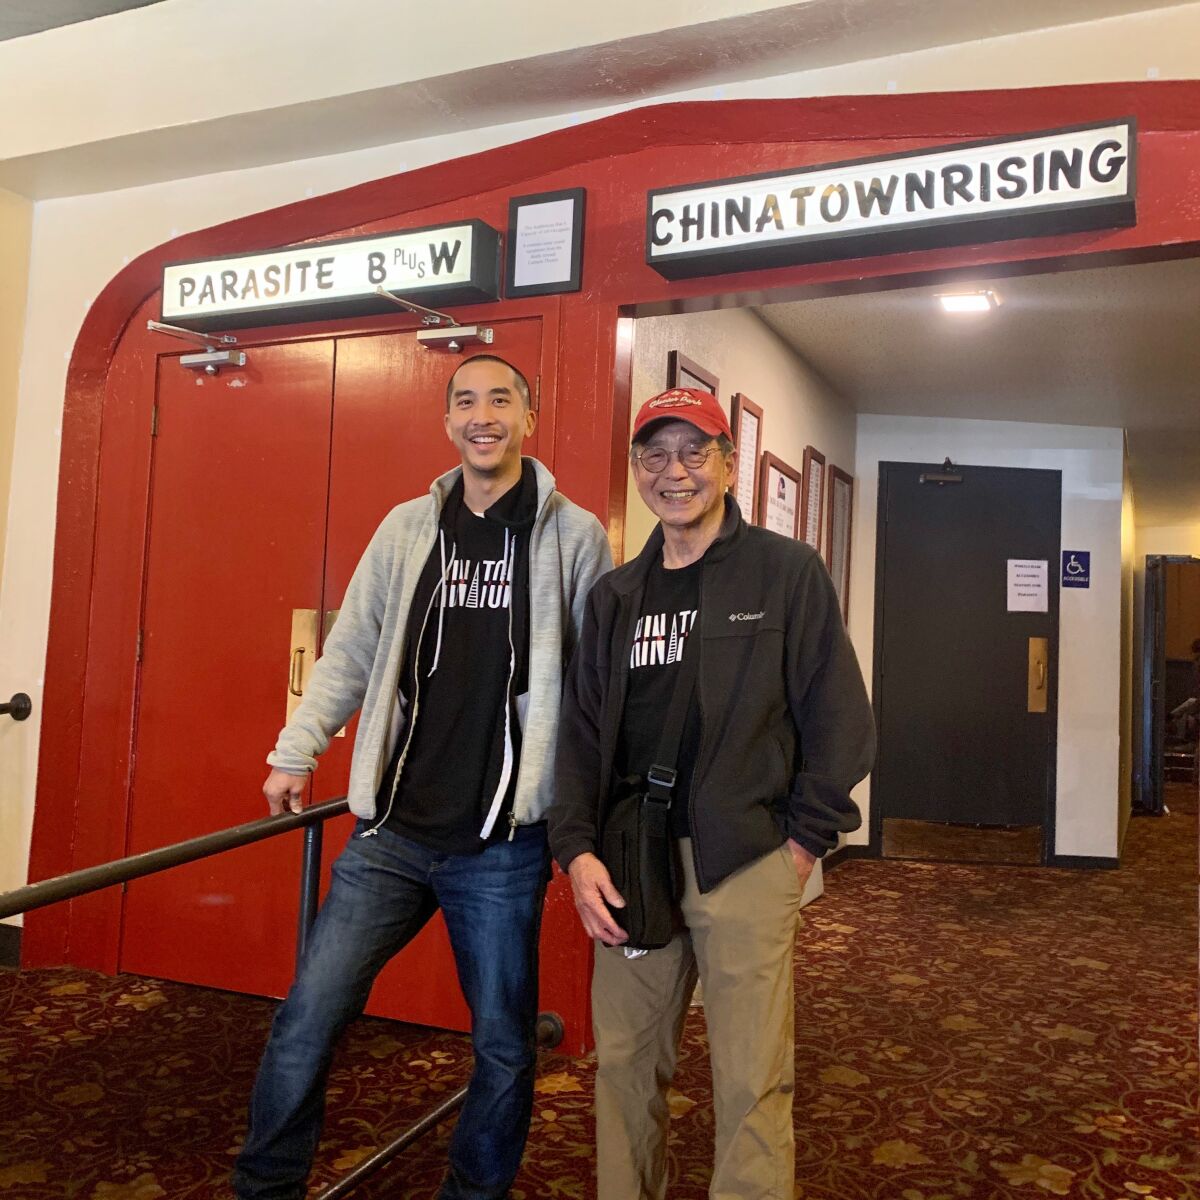 Co-directors of "Chinatown Rising," Josh, left, and Harry Chuck in the theater at one of their screenings.